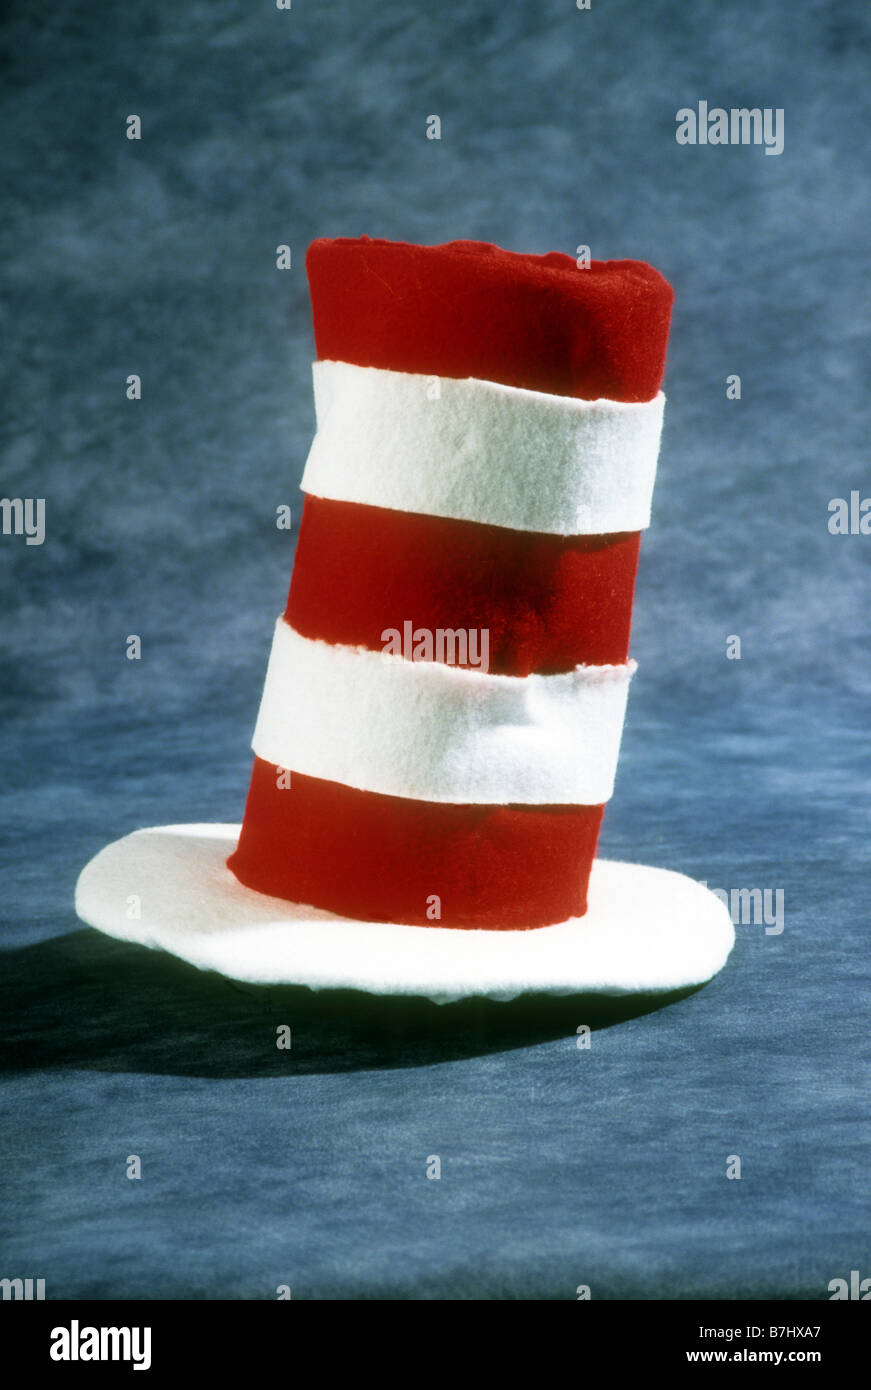 Dr. Seuss style red and white hat Stock Photo